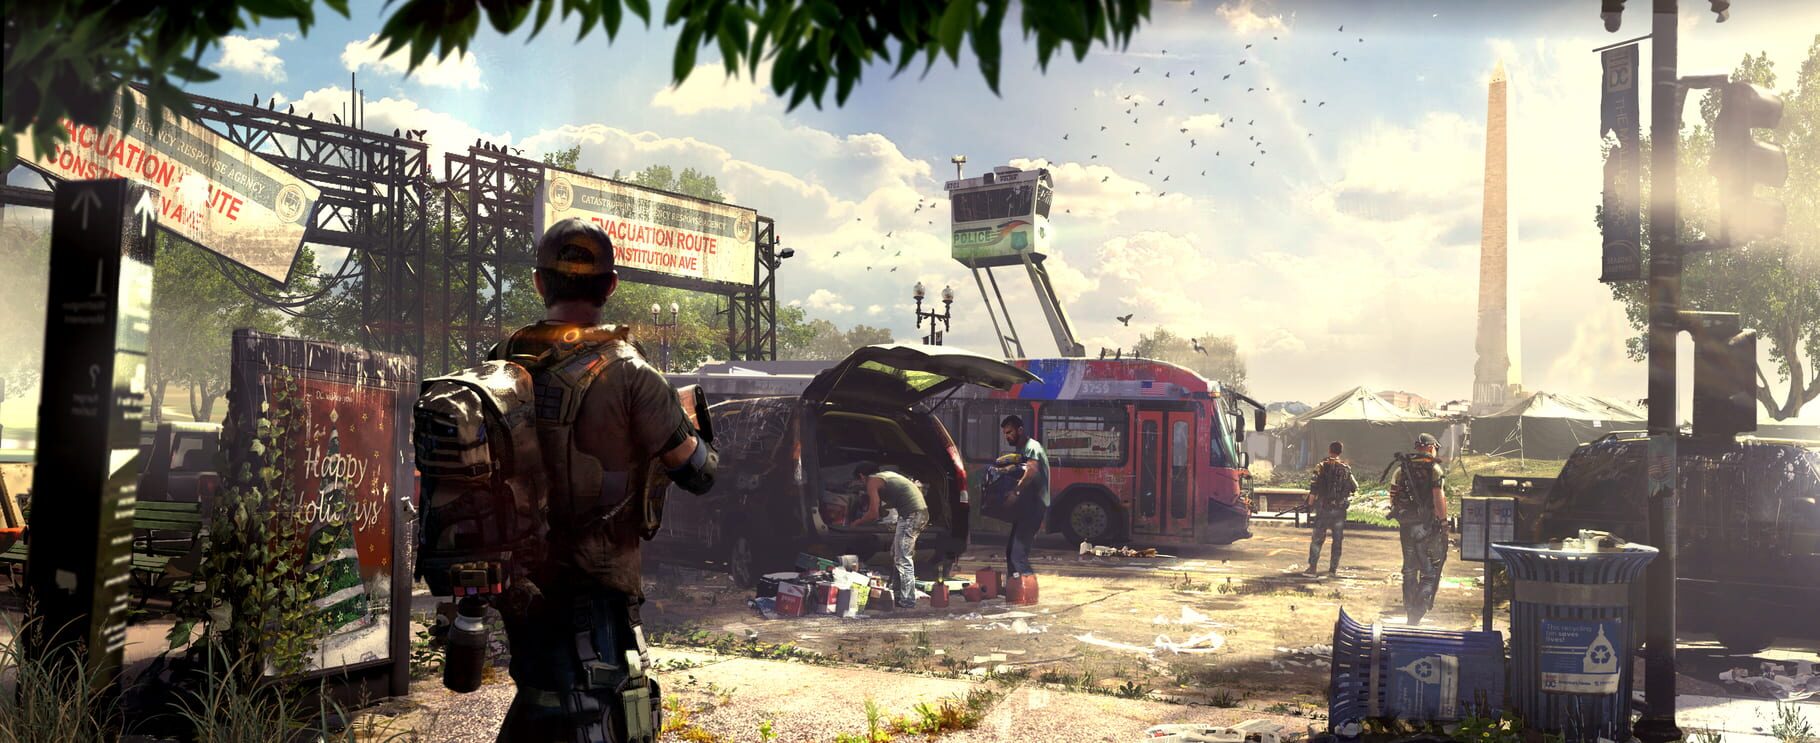 Artwork for Tom Clancy's The Division 2